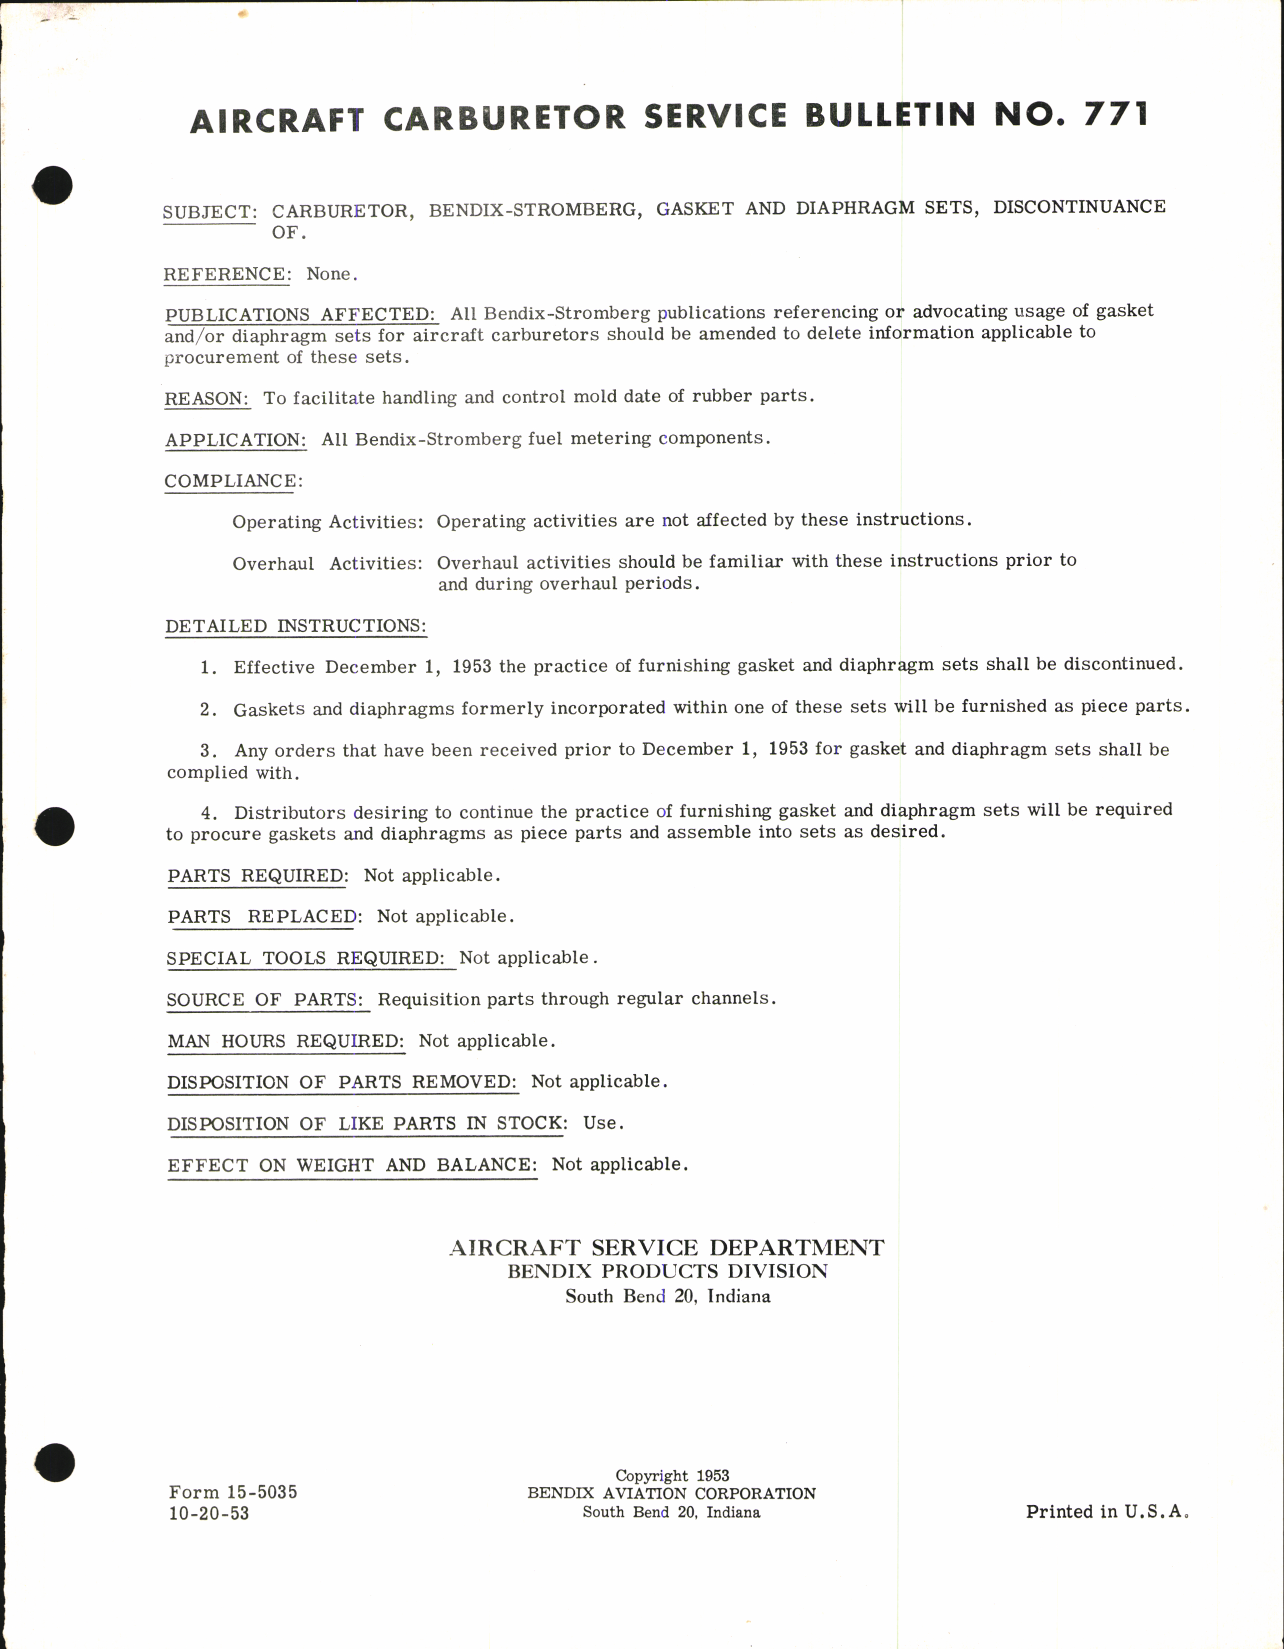 Sample page 1 from AirCorps Library document: Discontinuance of Carburetor, Bendix-Stromberg Gasket and Diaphragm Sets